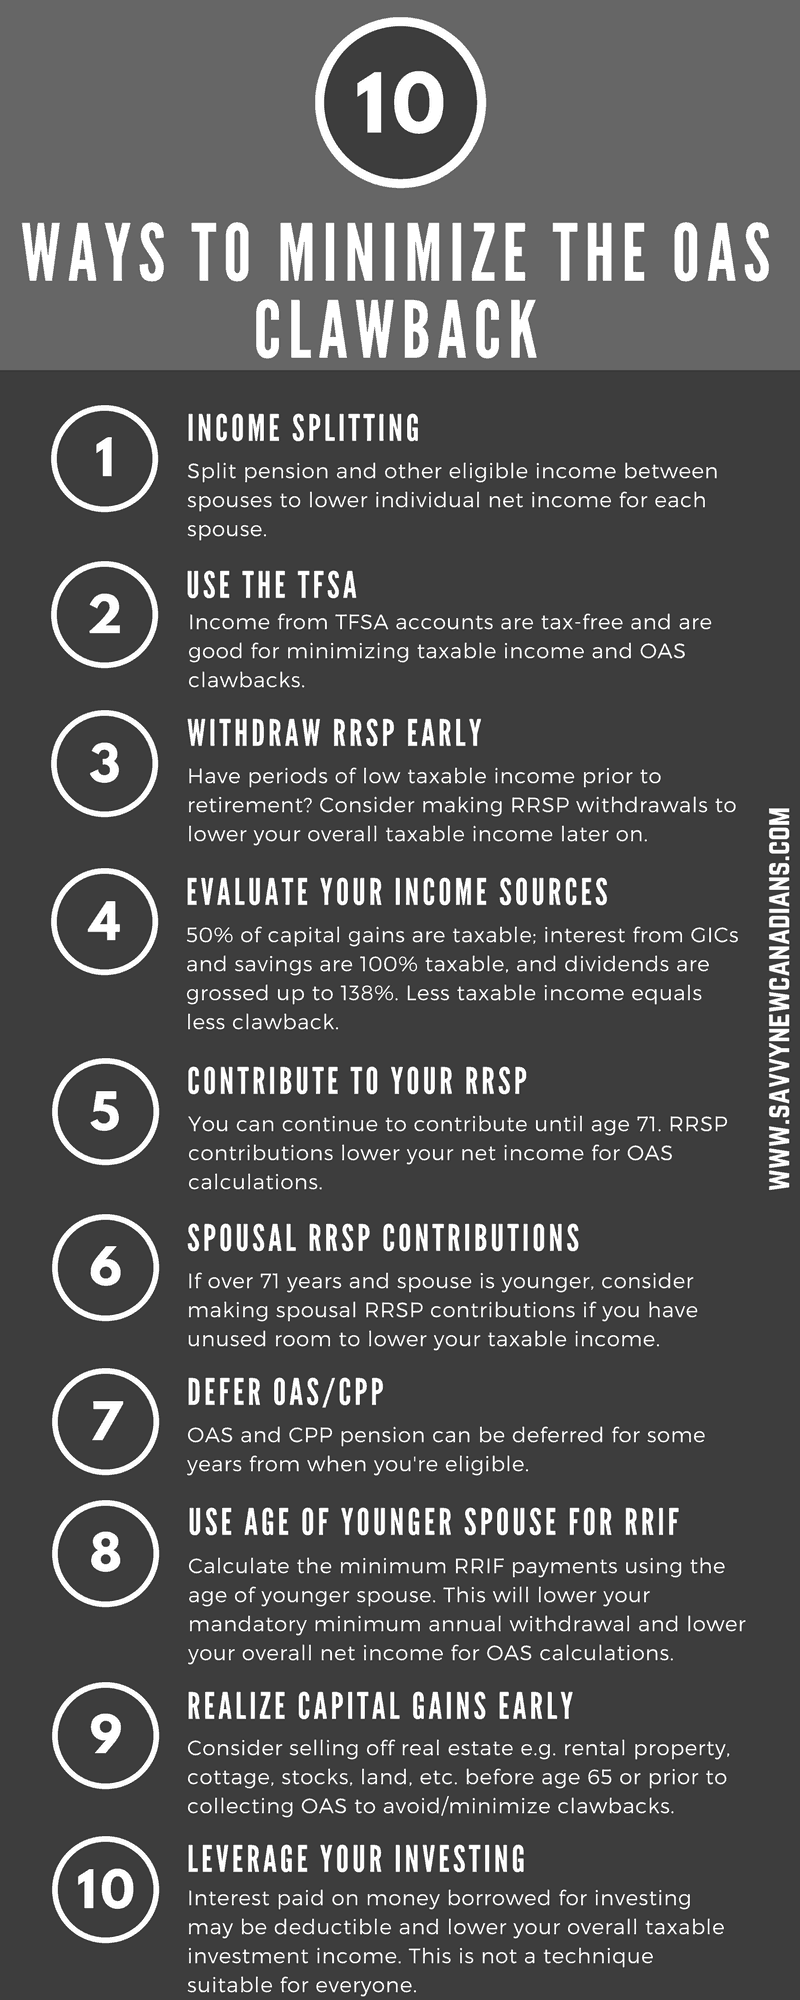 10 Ways To Minimize The OAS Clawback. Learn about how to keep all your OAS benefits in retirement. #OASbenefit #retirementplanning #CPP #RRSp #personalfinance #retirement